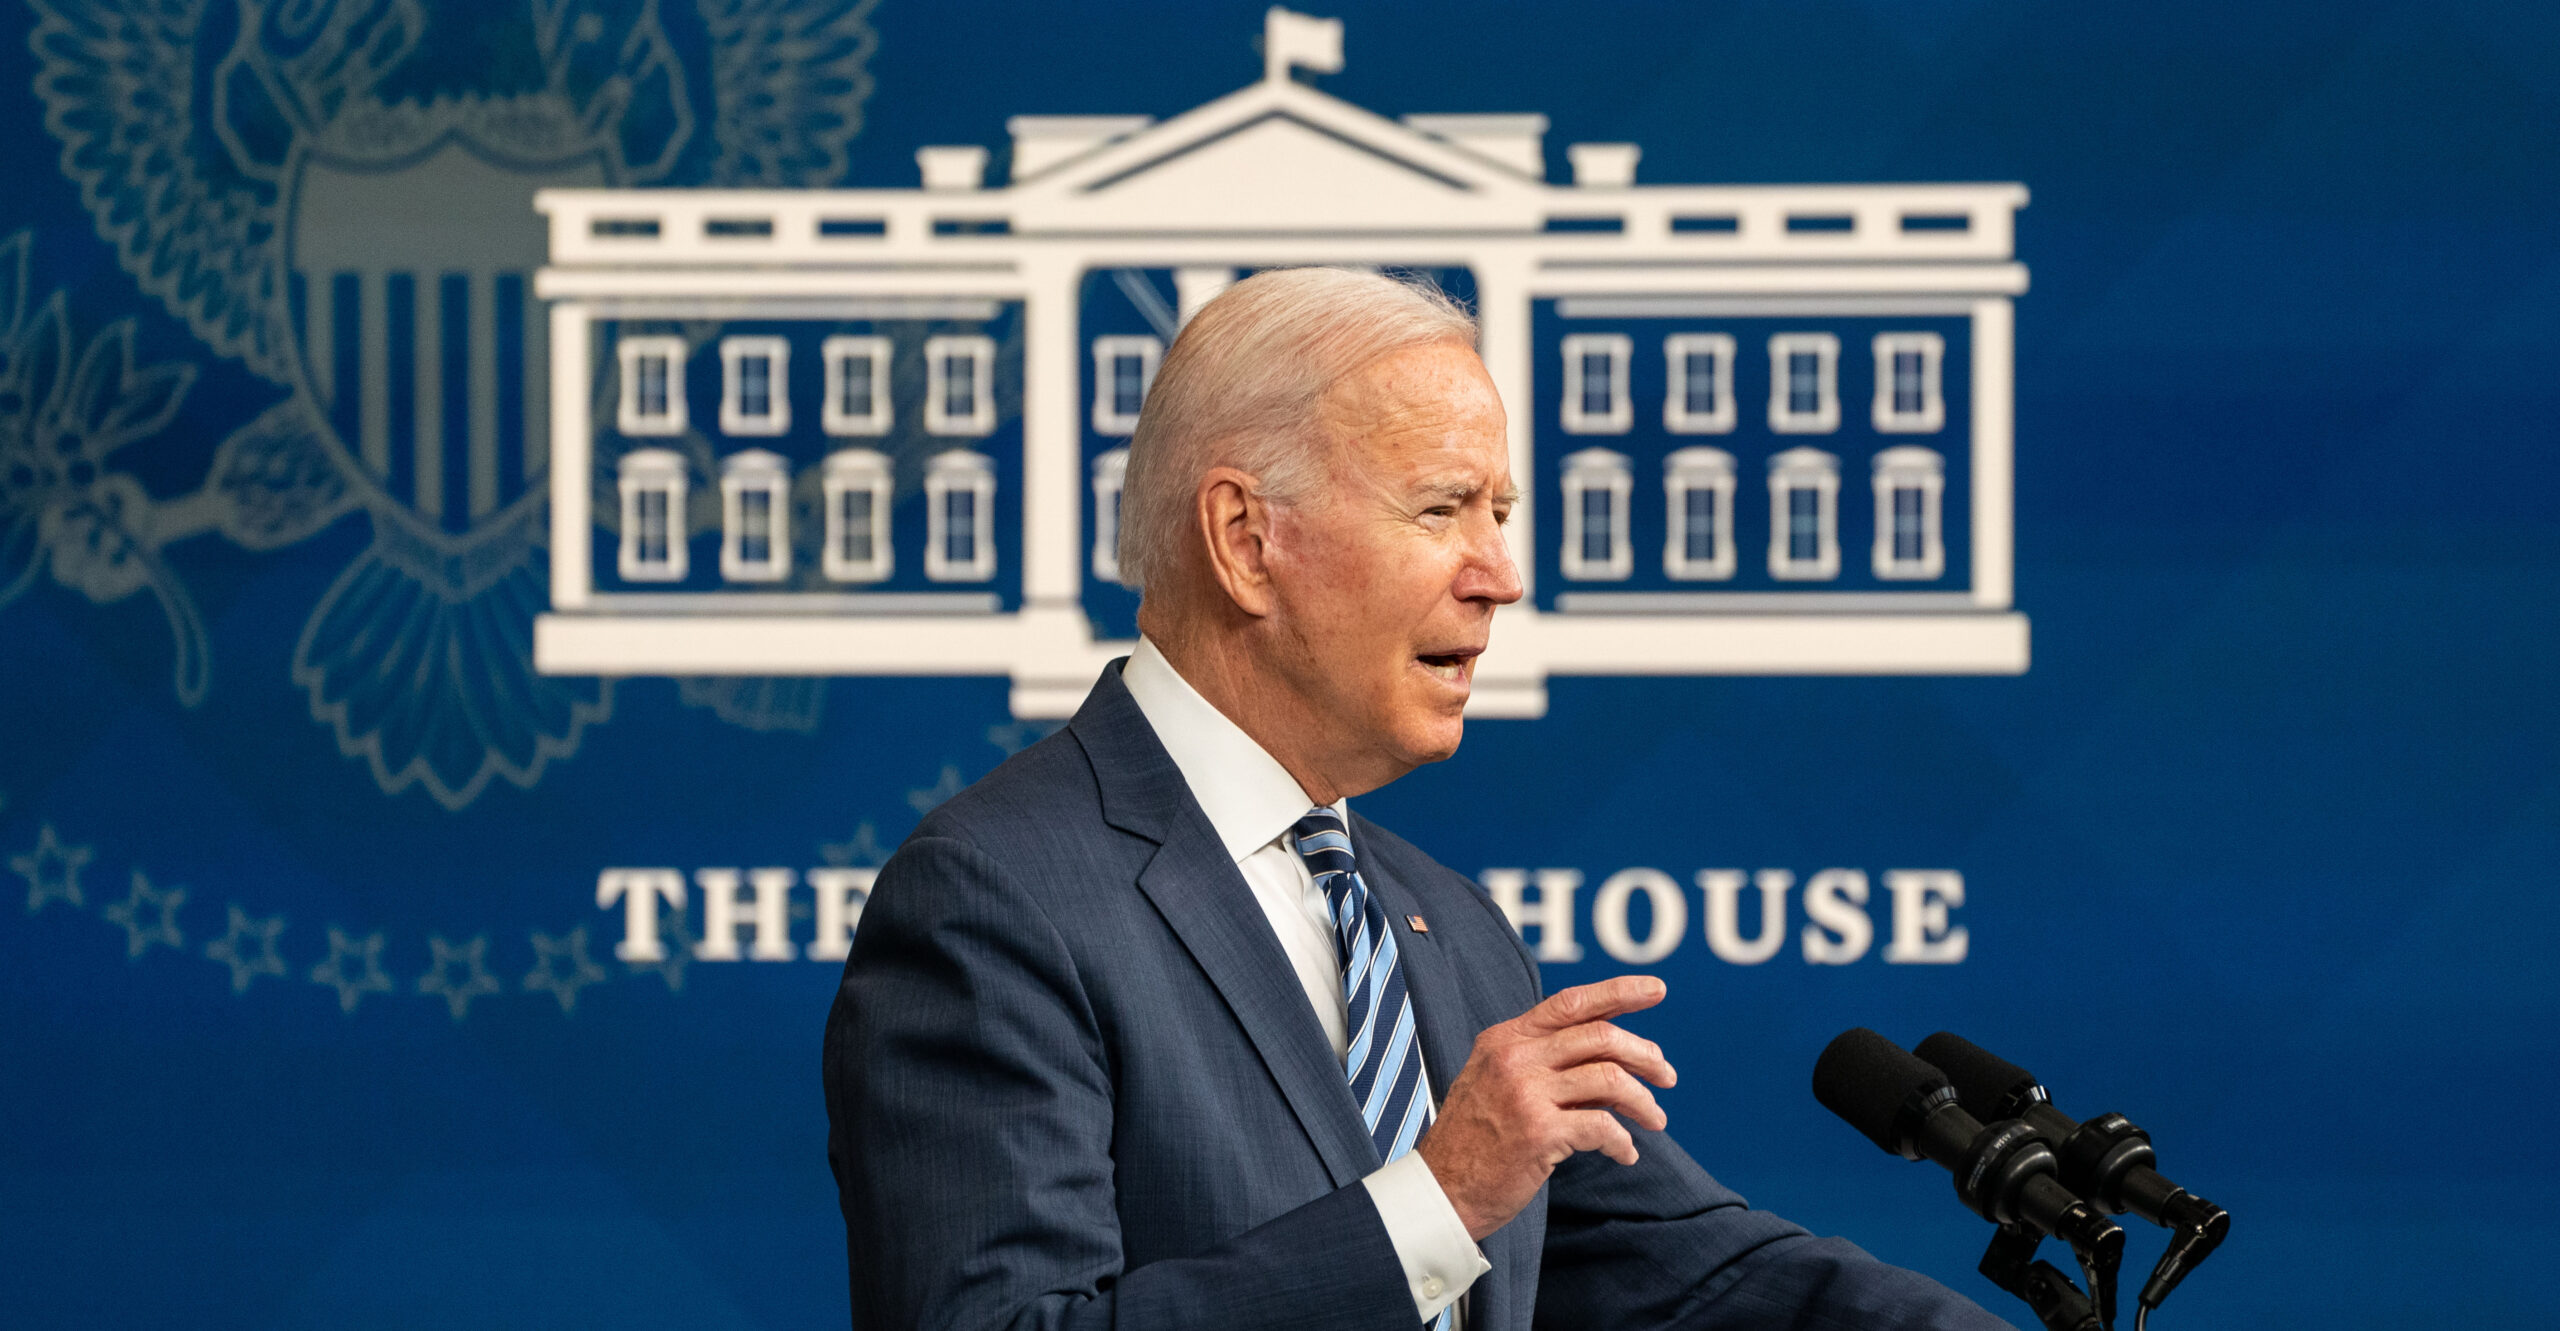 Biden Vows 'Whole of Government' Response to Texas Pro-Life Law